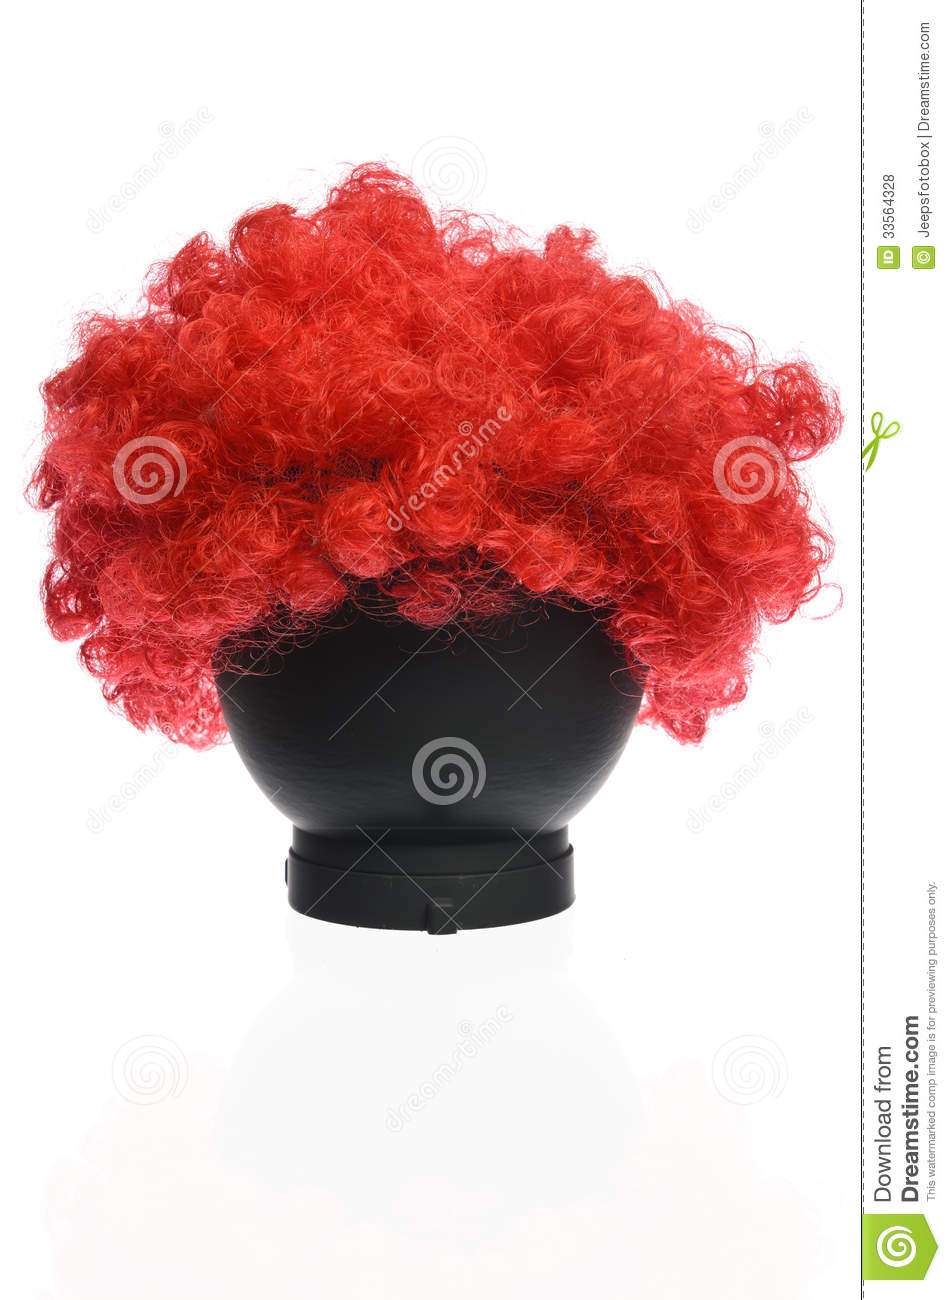 Red Curly Clown Wig Royalty Free Stock Photos   Image  33564328